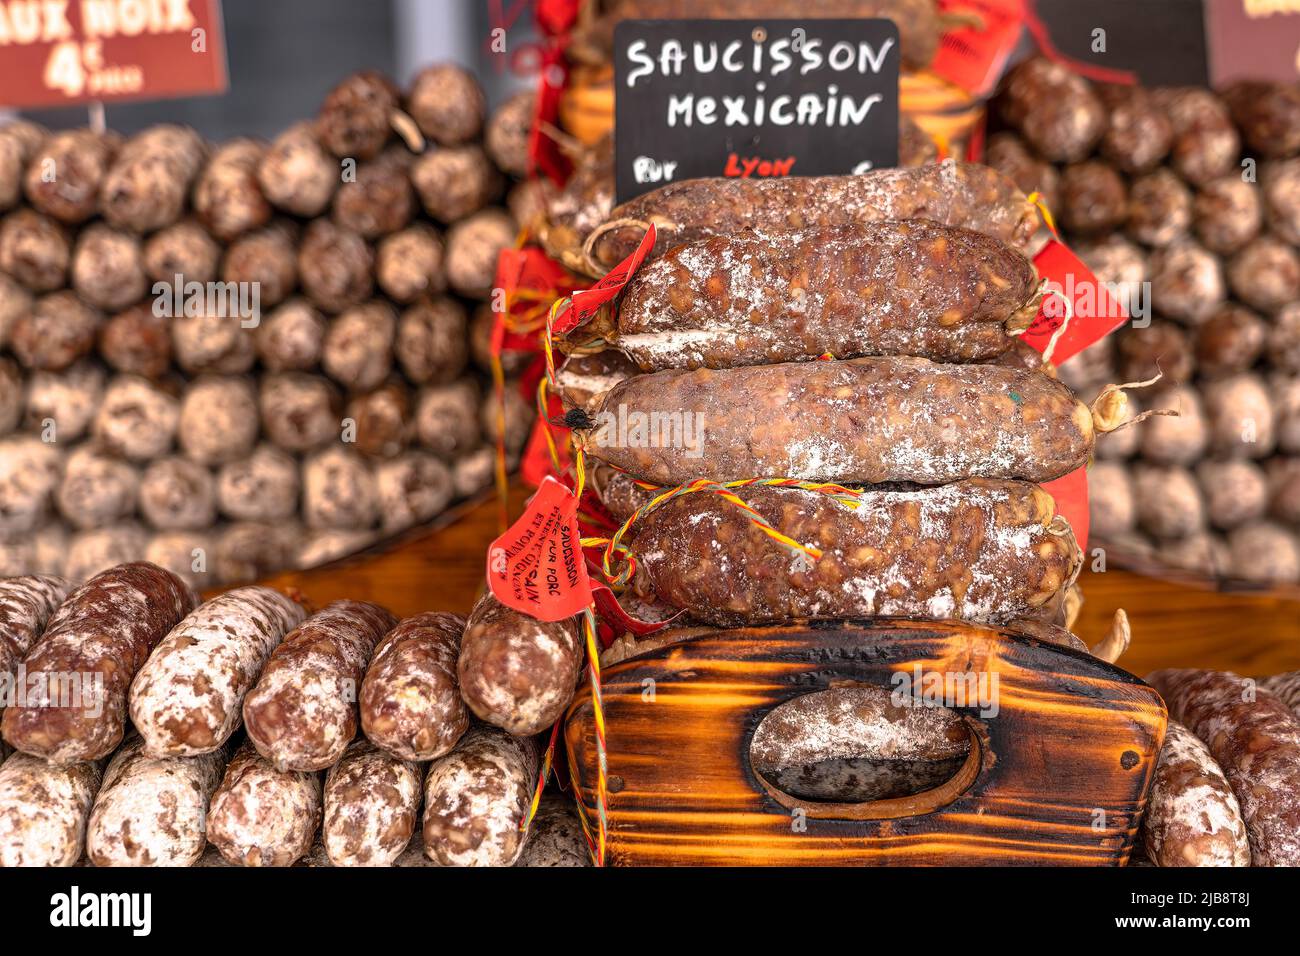 Stacks of various kinds of saucisson or saucisson sec - dry-cured sausages, typically made of pork, or a mixture of pork and other meats. Stock Photo